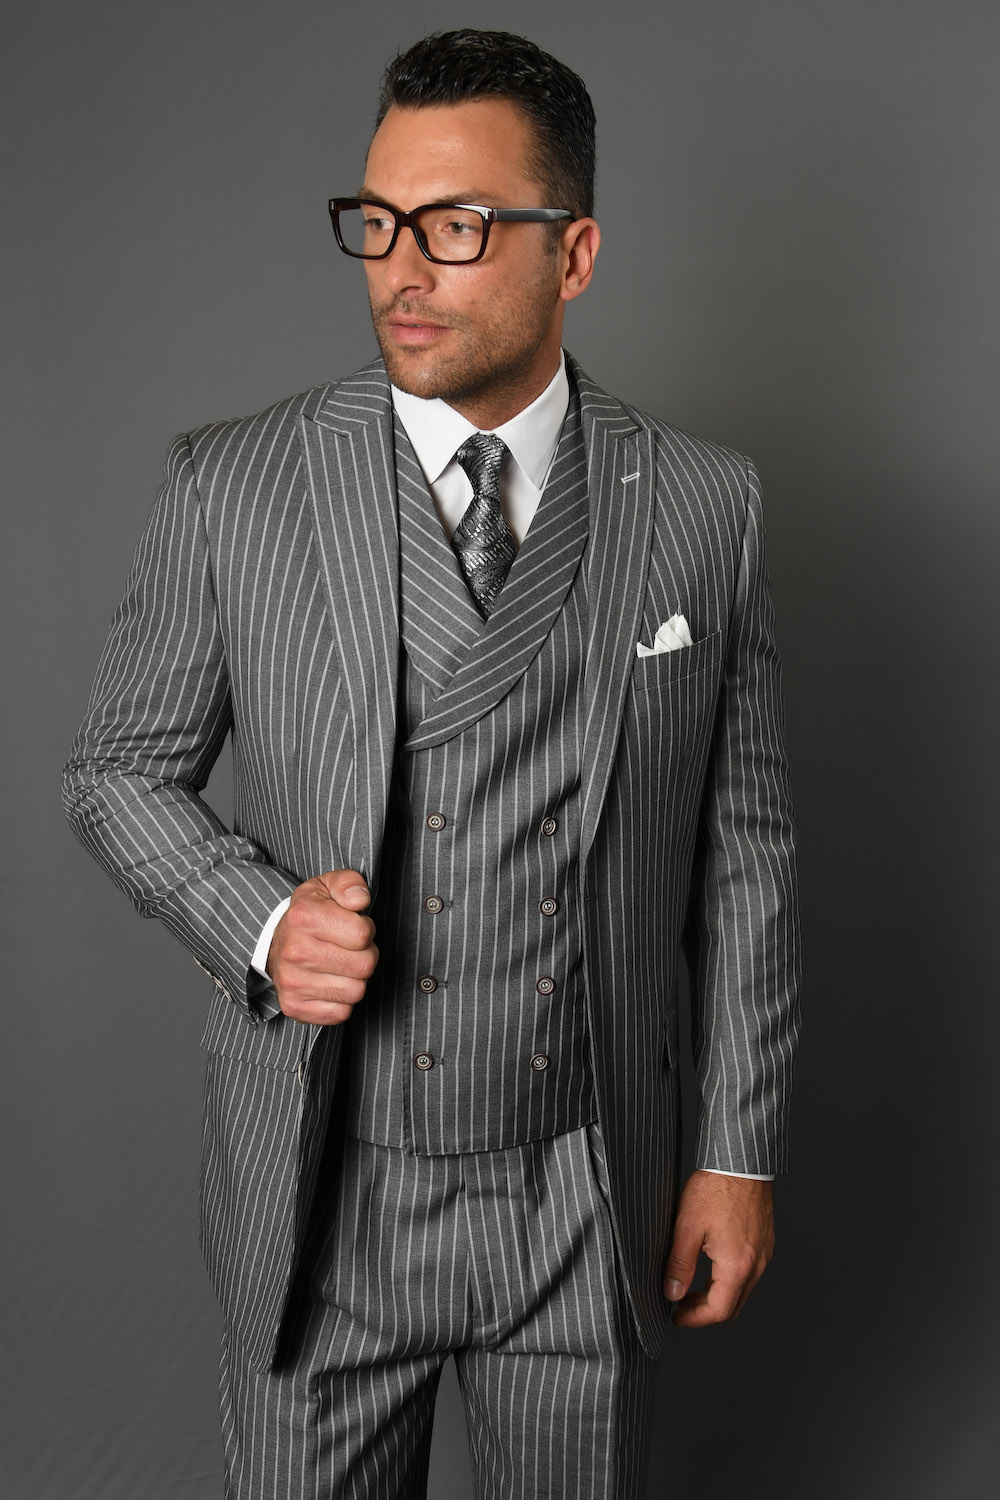 ZARELLI GREY 3PC 2 BUTTON PINSTRIPE, DOUBLE BREASTED VEST, PLEATED PANTS SUPER 150'S WOOL SUIT EXTRA FINE ITALIAN MADE   